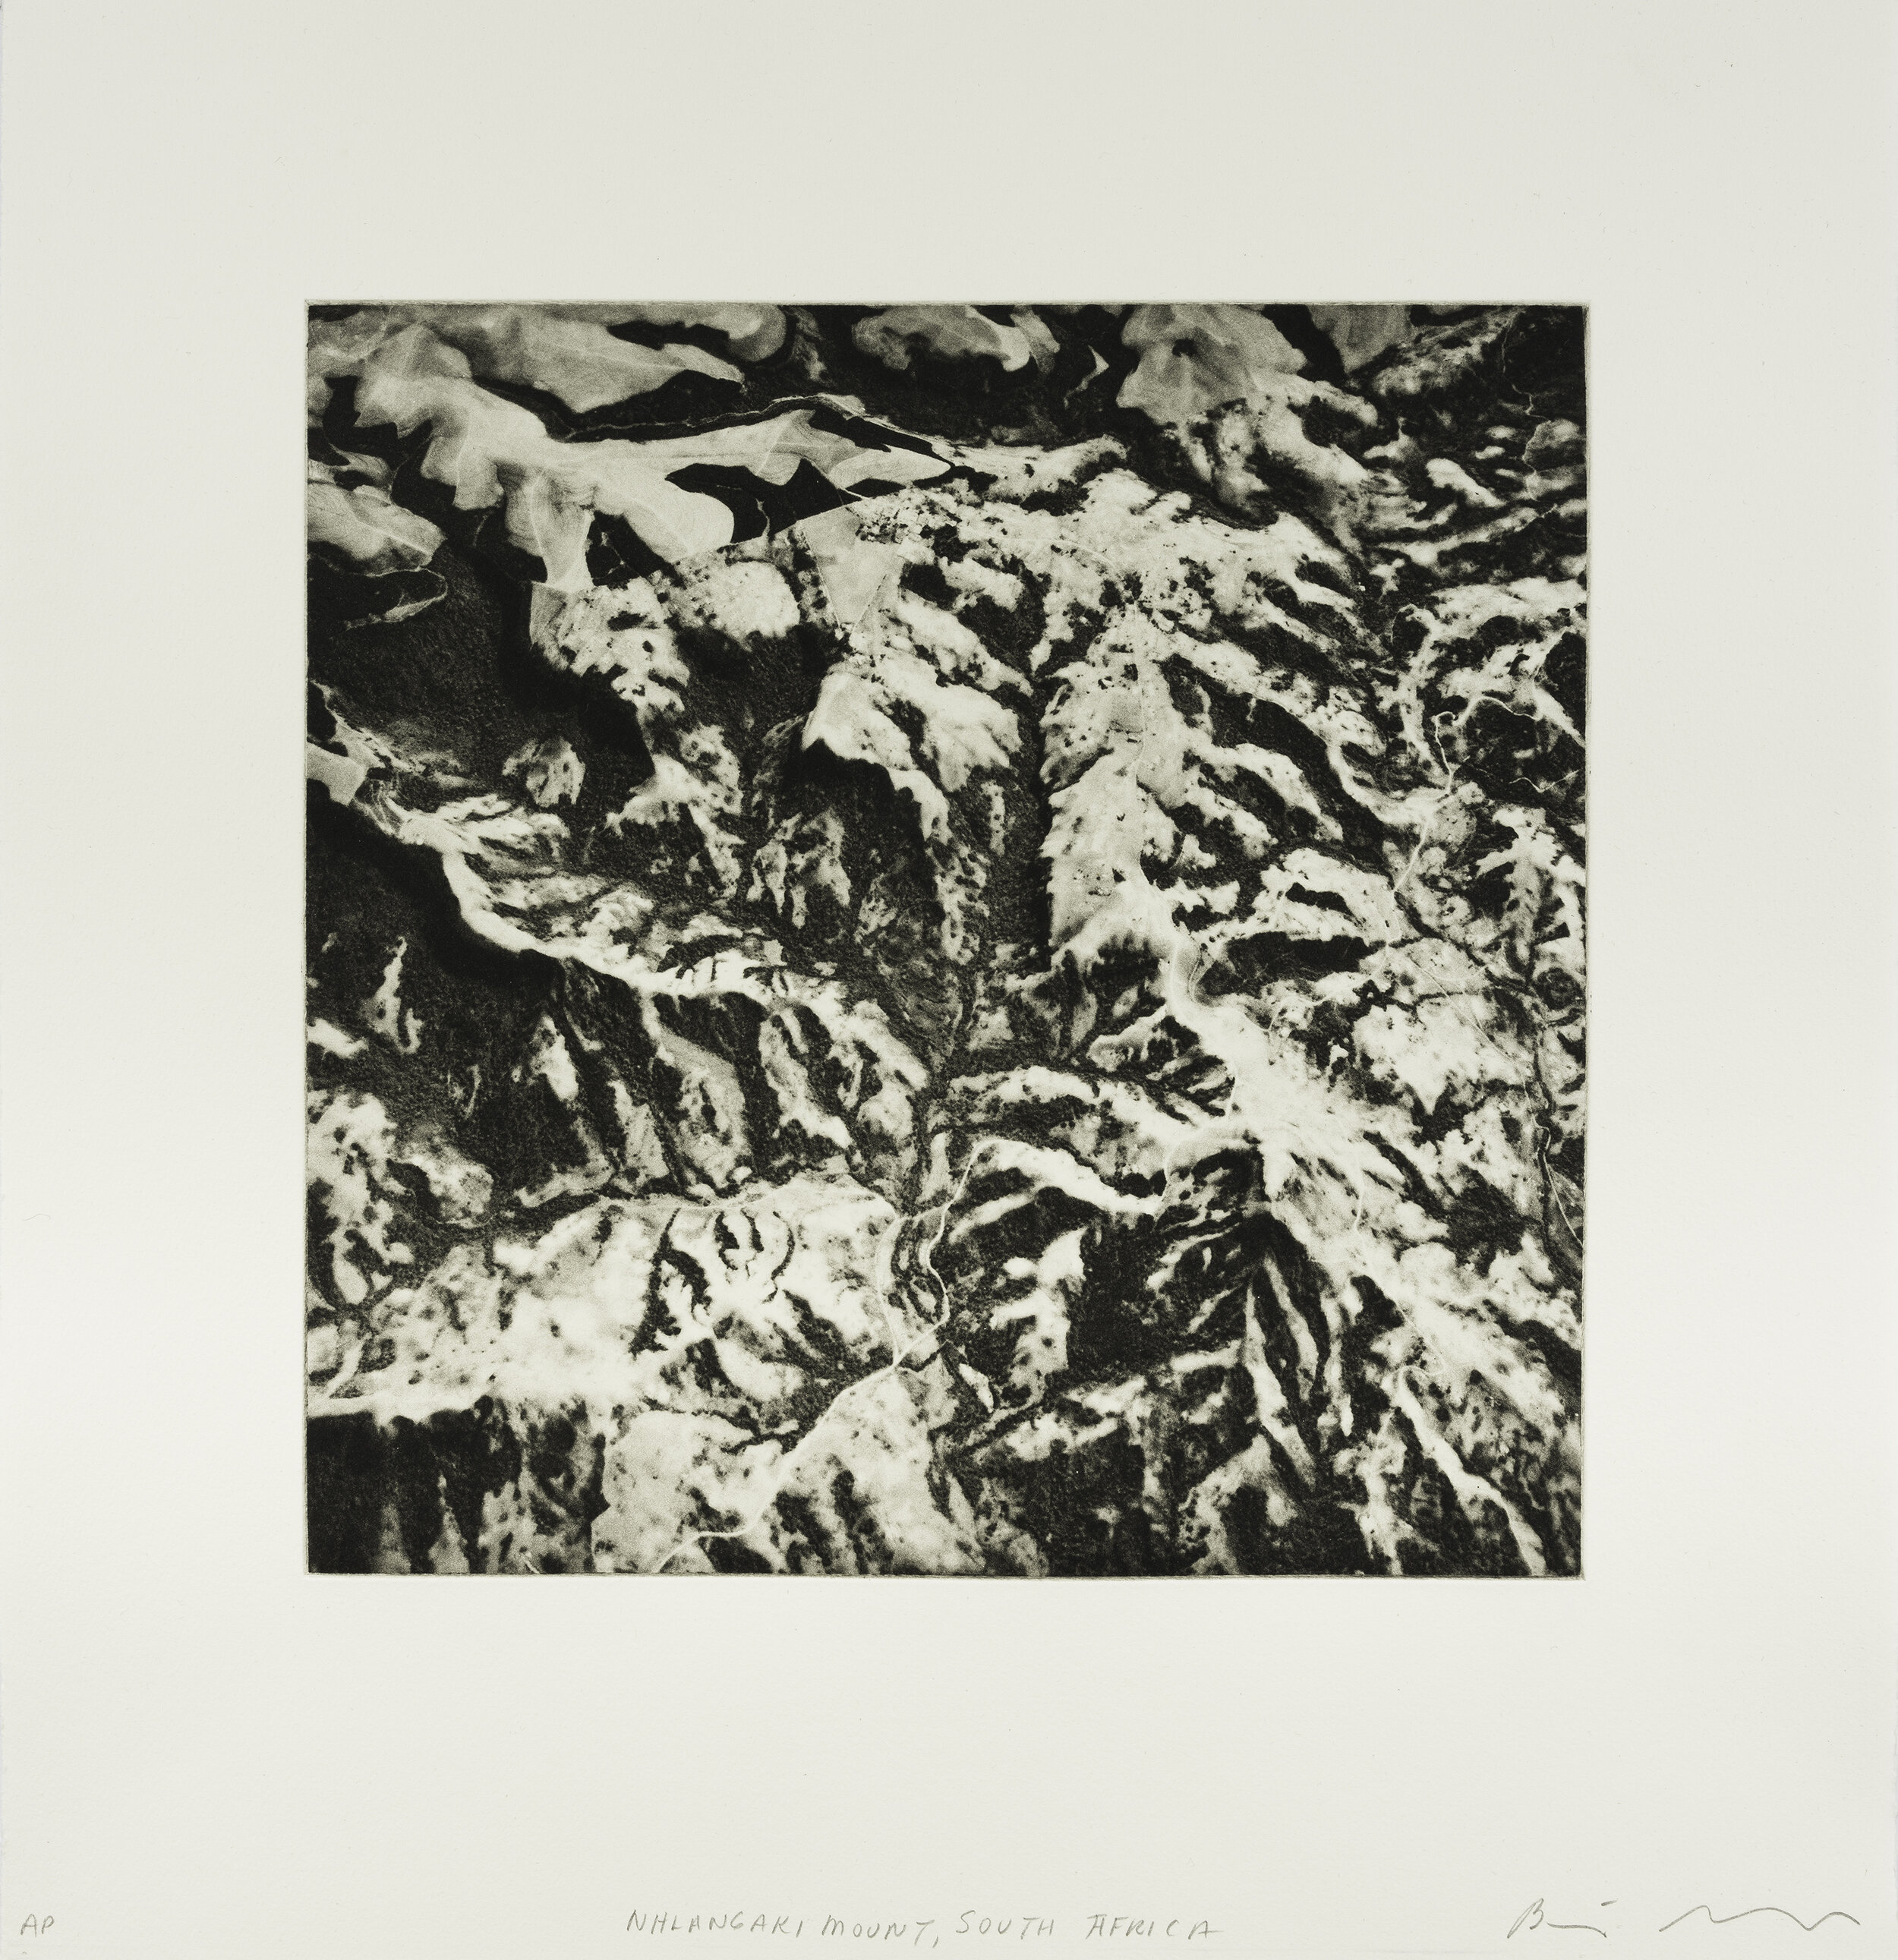    Mount Nhlangakazi, South Africa, 2020   Copperplate Photogravure on cotton rag paper, image size, 10.6 x 10.6; paper size, 16 x 15.5 , edition 10 